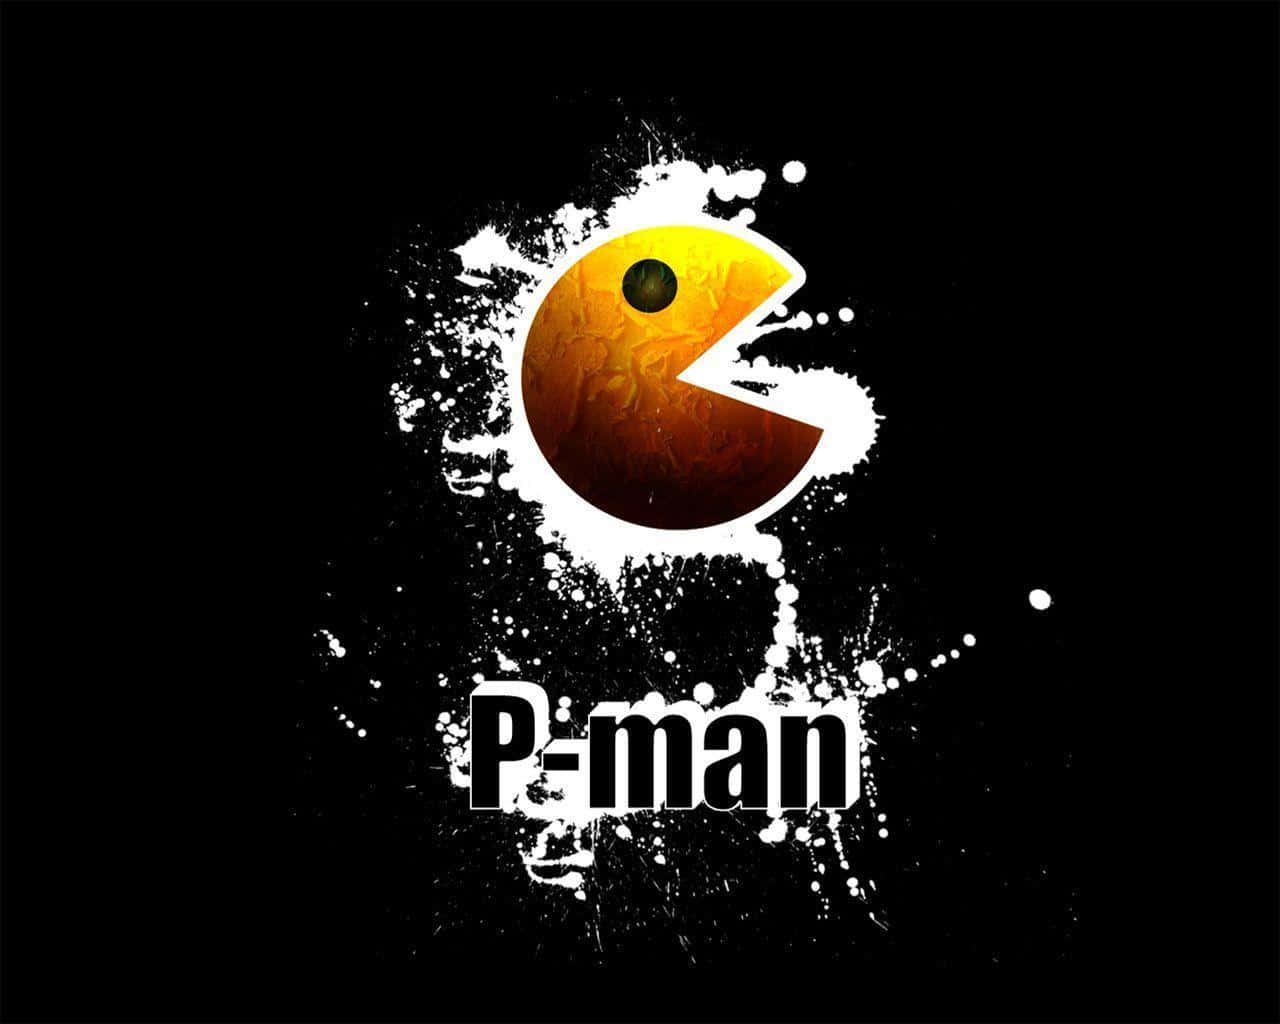 A Pacman Logo On A Black Background